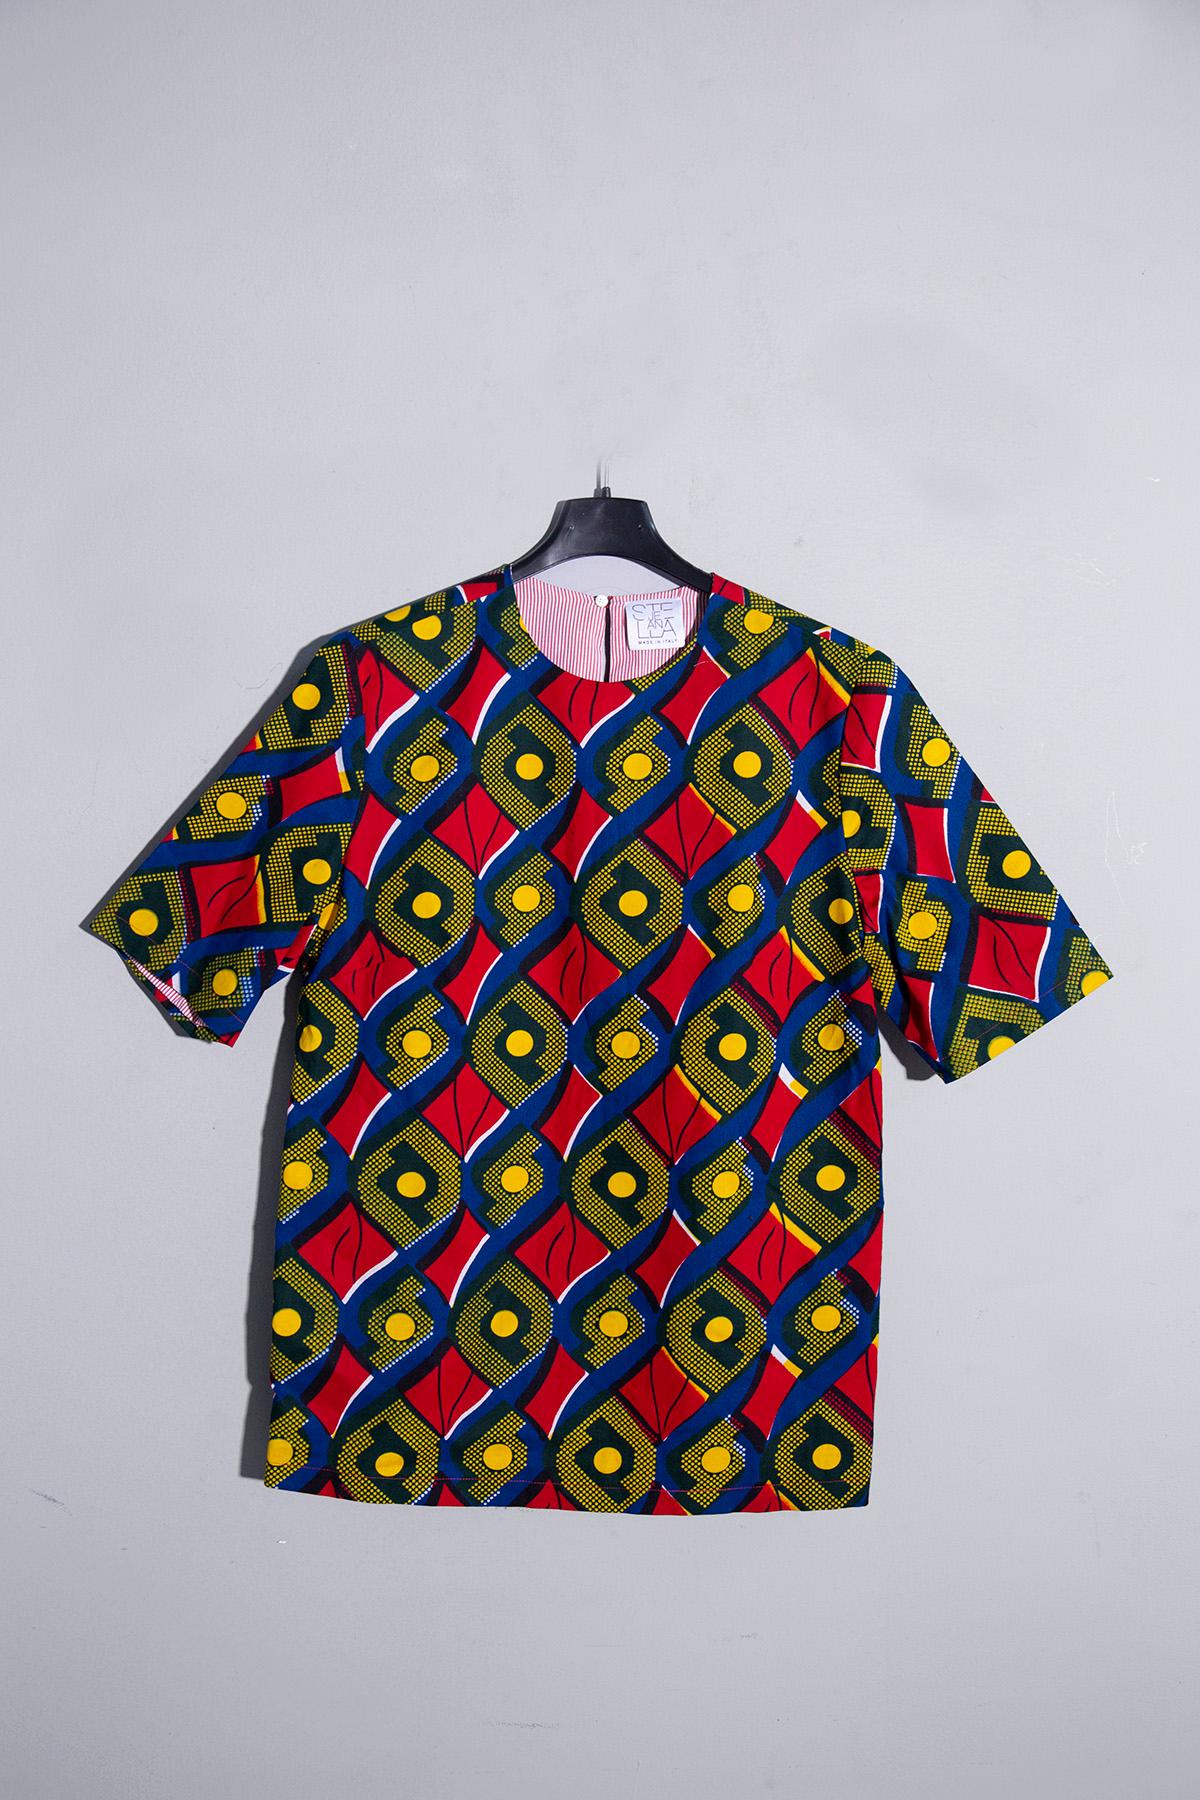 Embark on a sartorial journey to the heart of Africa with the STELLA Jean T-shirt from the circa 2014 collection. As you slip into its embrace, you'll be enveloped by the allure of regular, yet distinctly delineated shapes, evoking a sense of